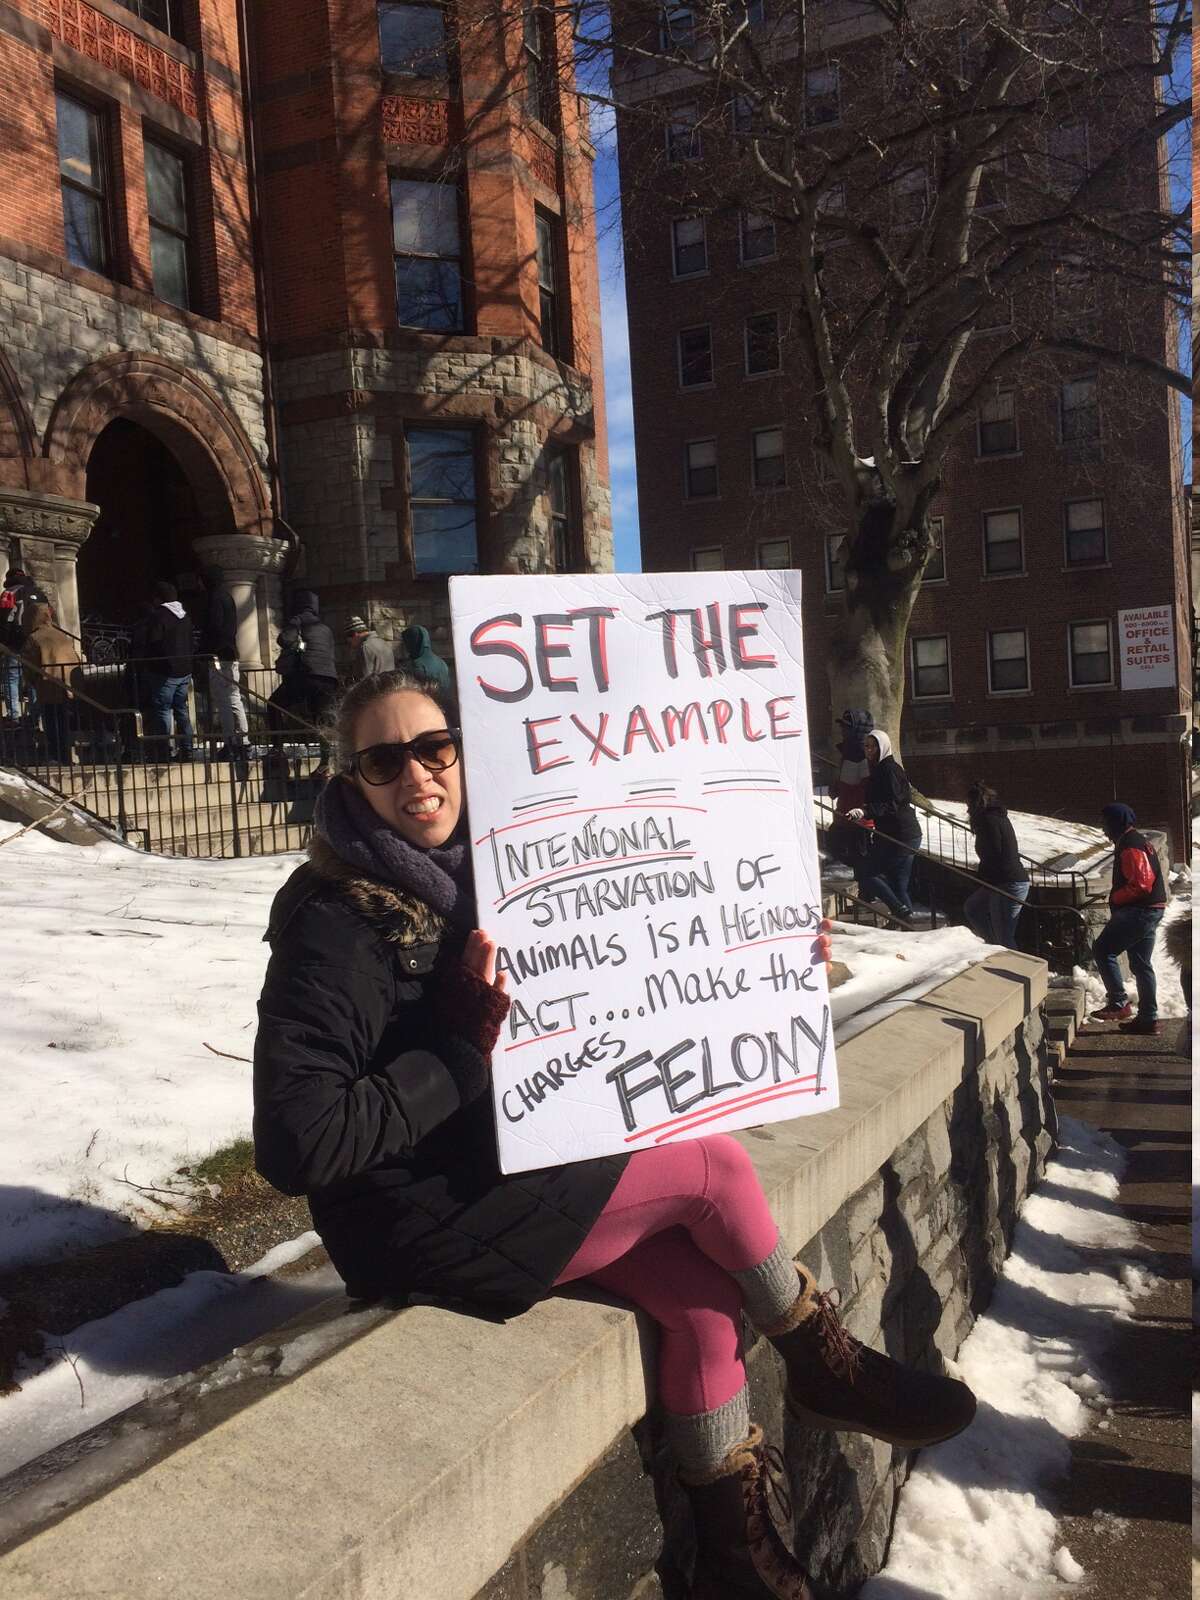 Nicola Improta, of Redding, protesting outside the Golden Hill Street courthouse in Bridgeport, Conn., prior to the arraignment of Heidi Lueders on Wednesday, Feb. 13, 2019.